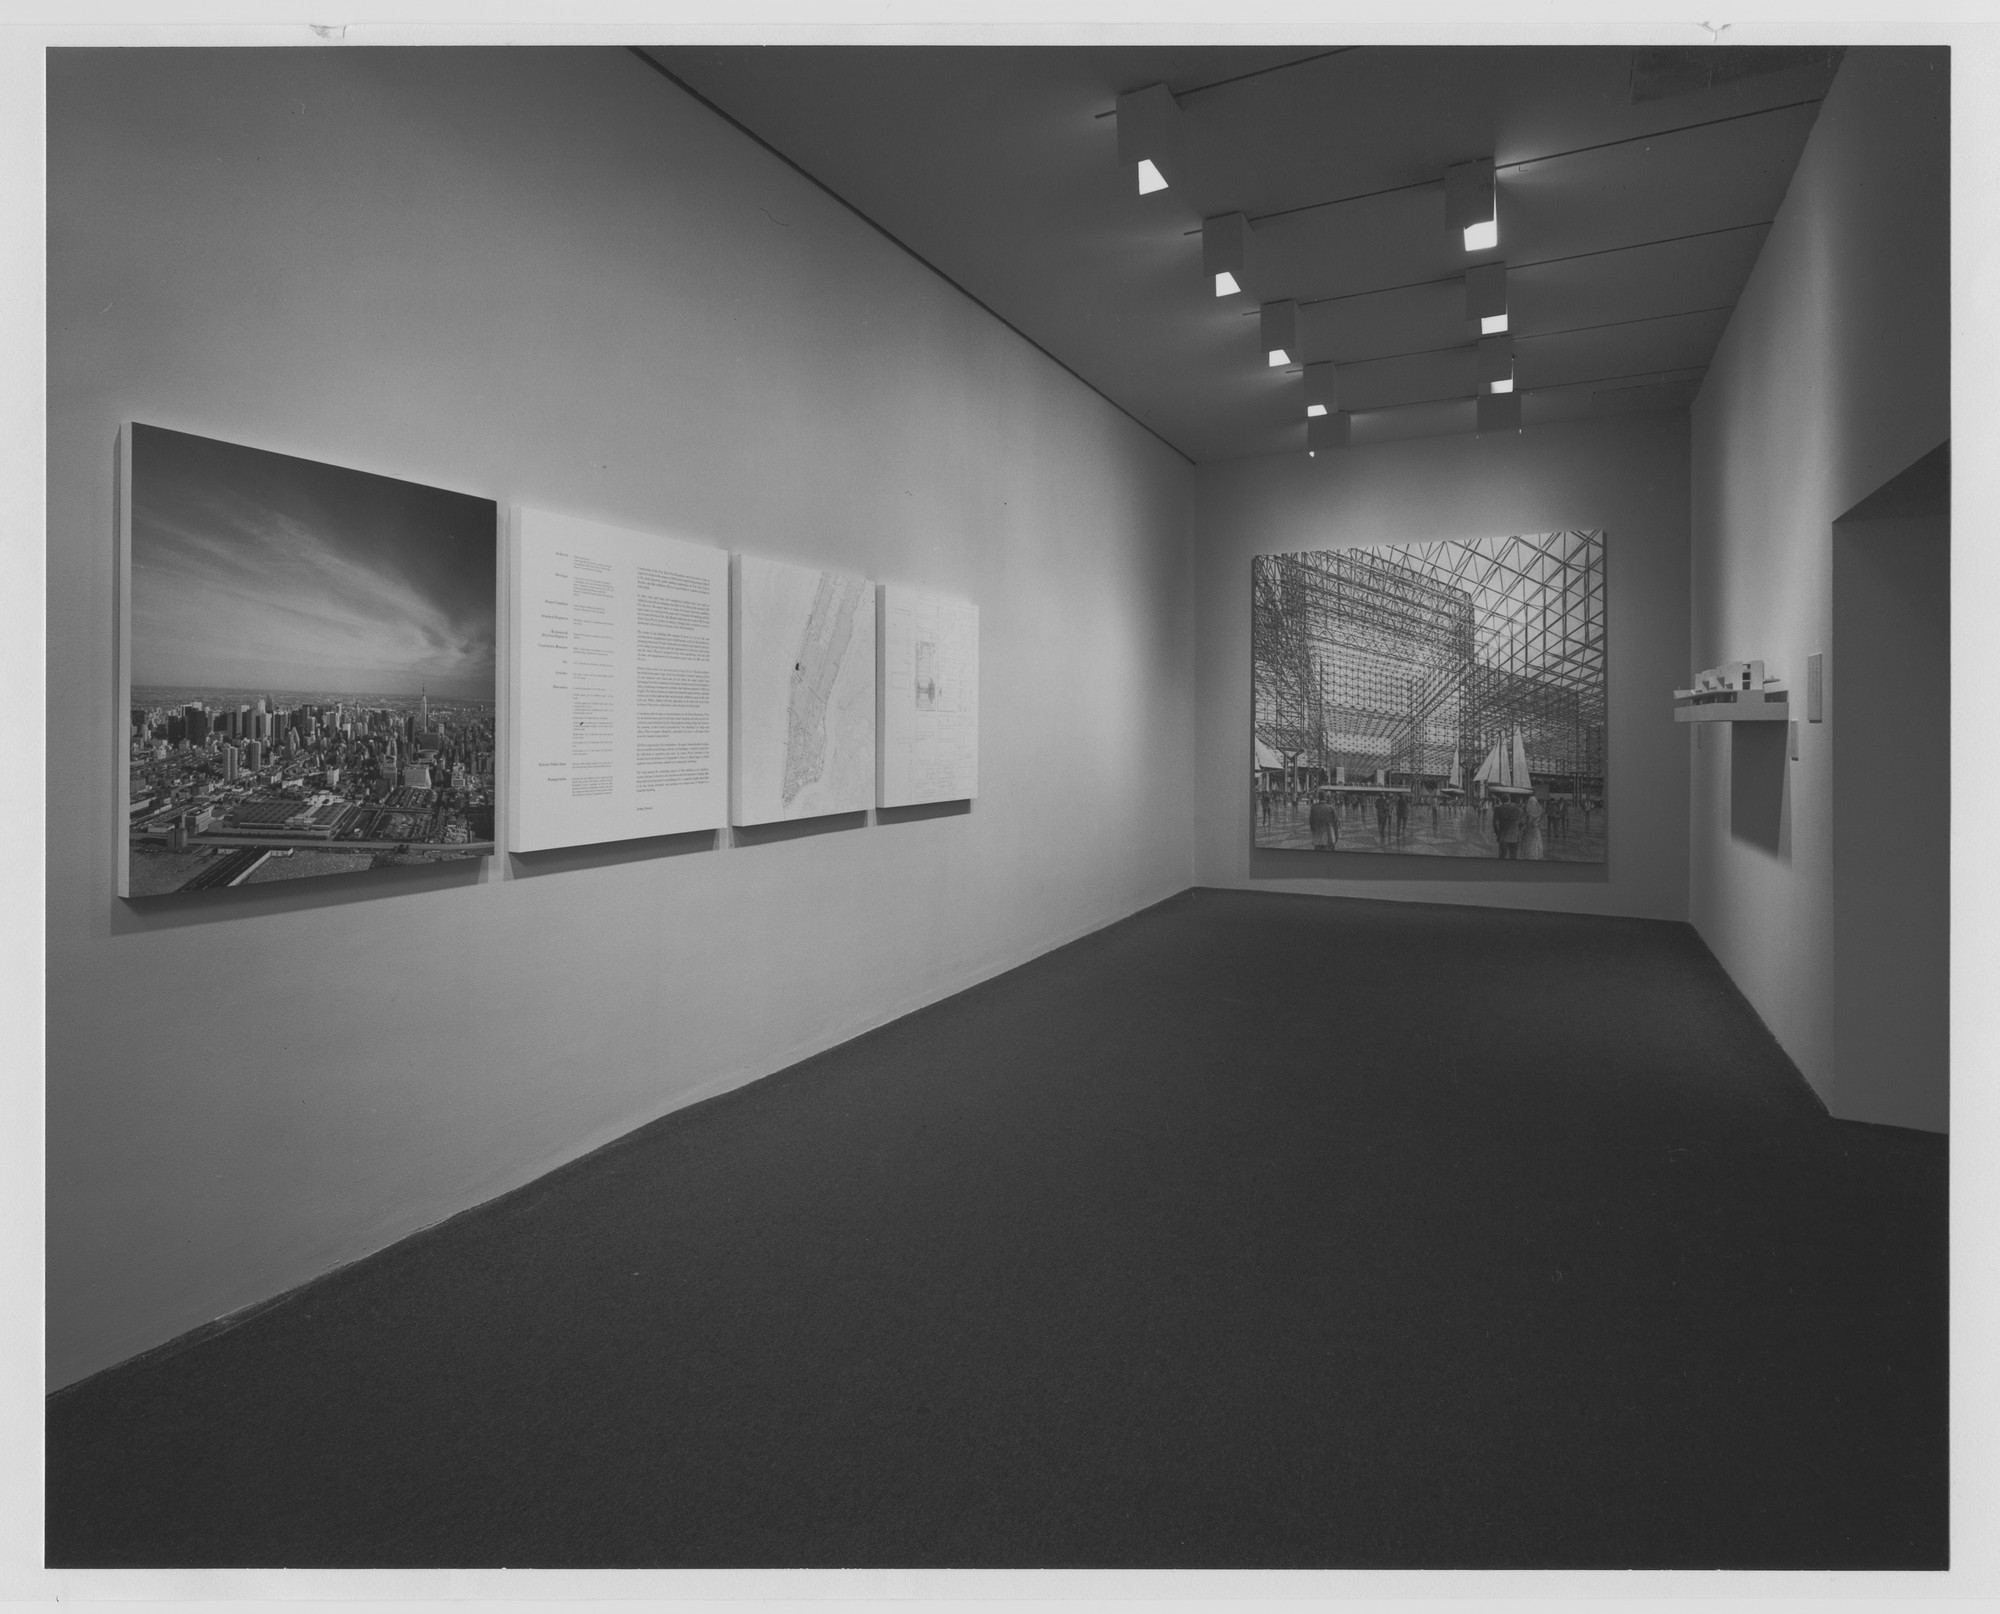 Installation view of the exhibition "New York City Exposition and